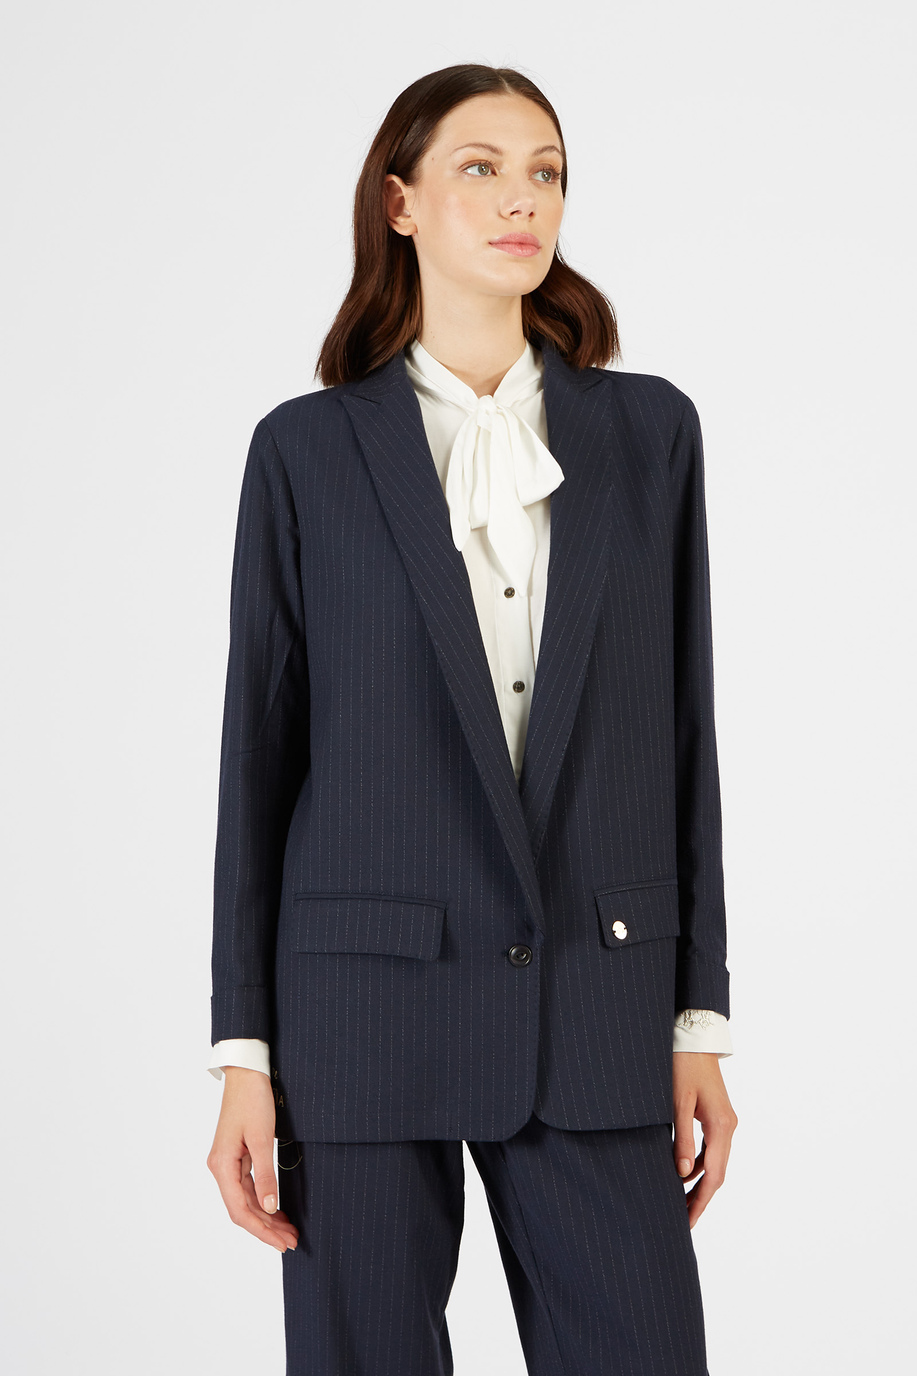 Women’s single-breasted jacquard blazer with regular fit pockets - Business Looks Women | La Martina - Official Online Shop